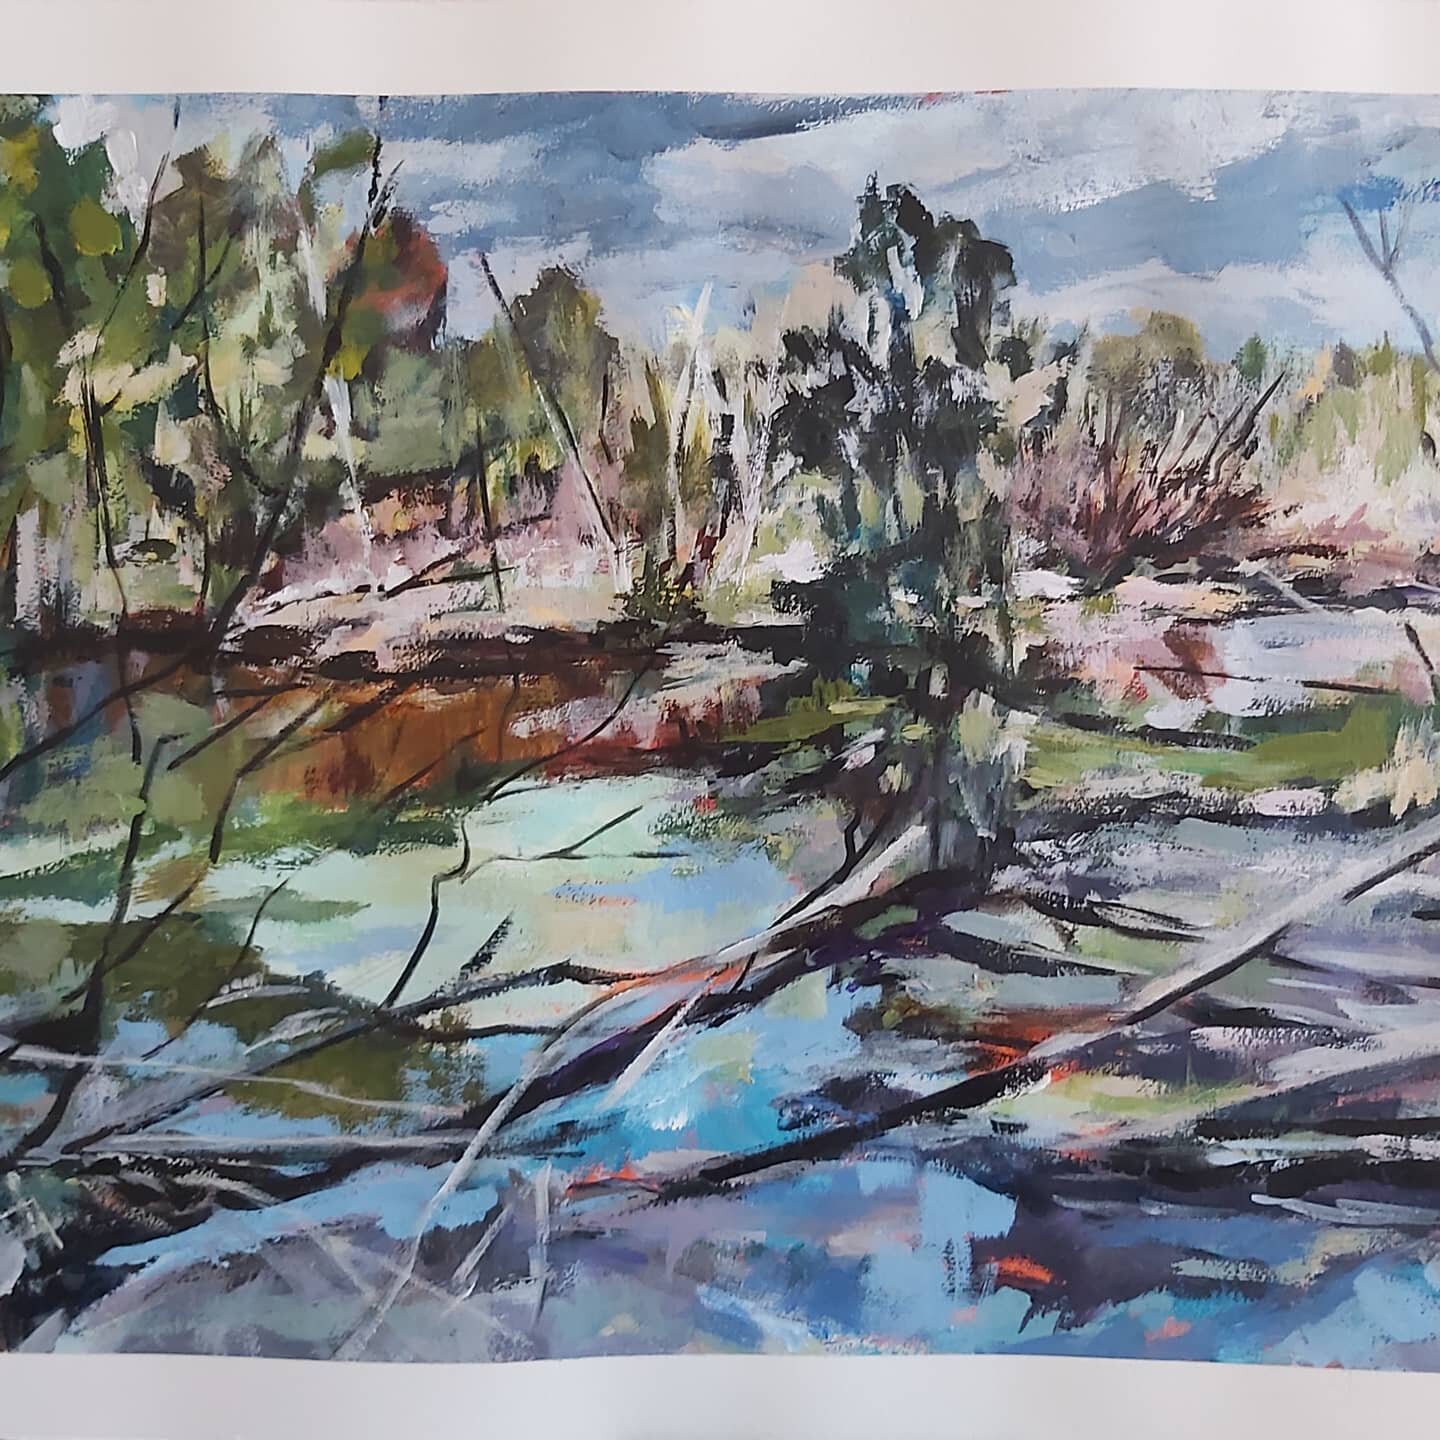 DAY 76 of the 100 day project was putting in the final touches on this landscape on paper.  Taking a small break  from my 100 days of mixed media work,  24 pieces left to do, I am still motivated but just too busy in the garden for a bit.